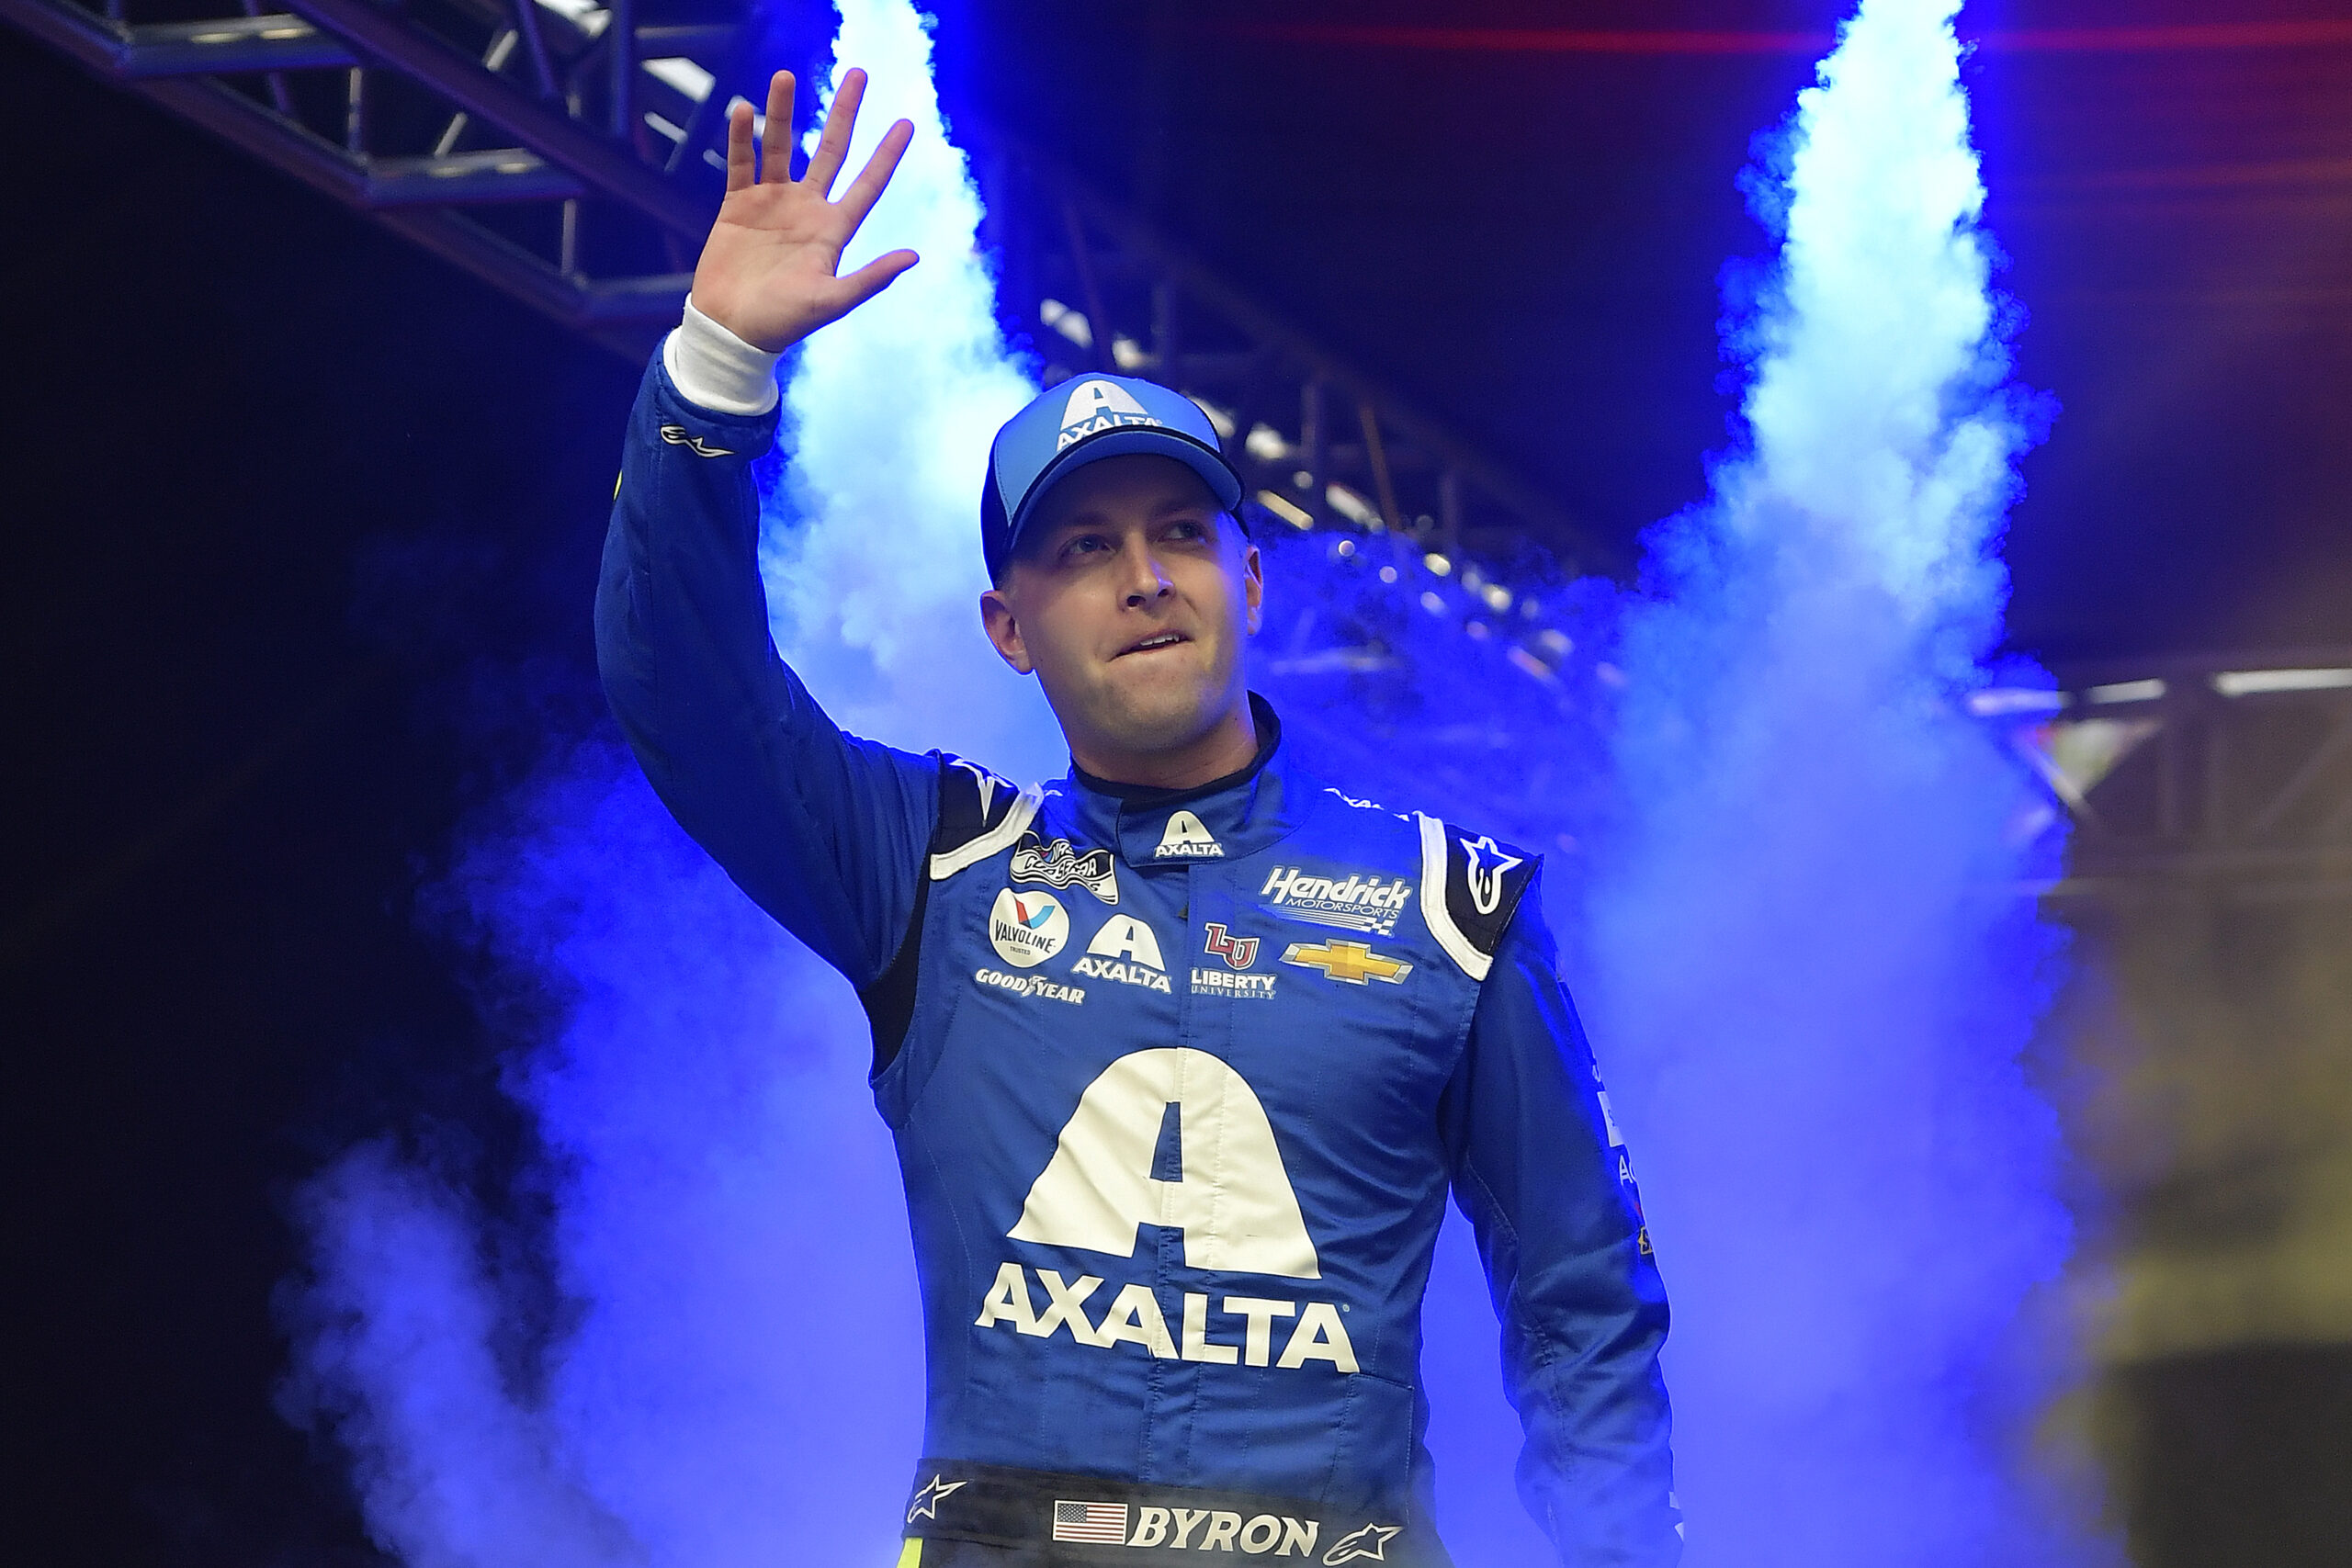 Byron answered the bell at Bristol. (Photo: Logan Riely | Getty Images)